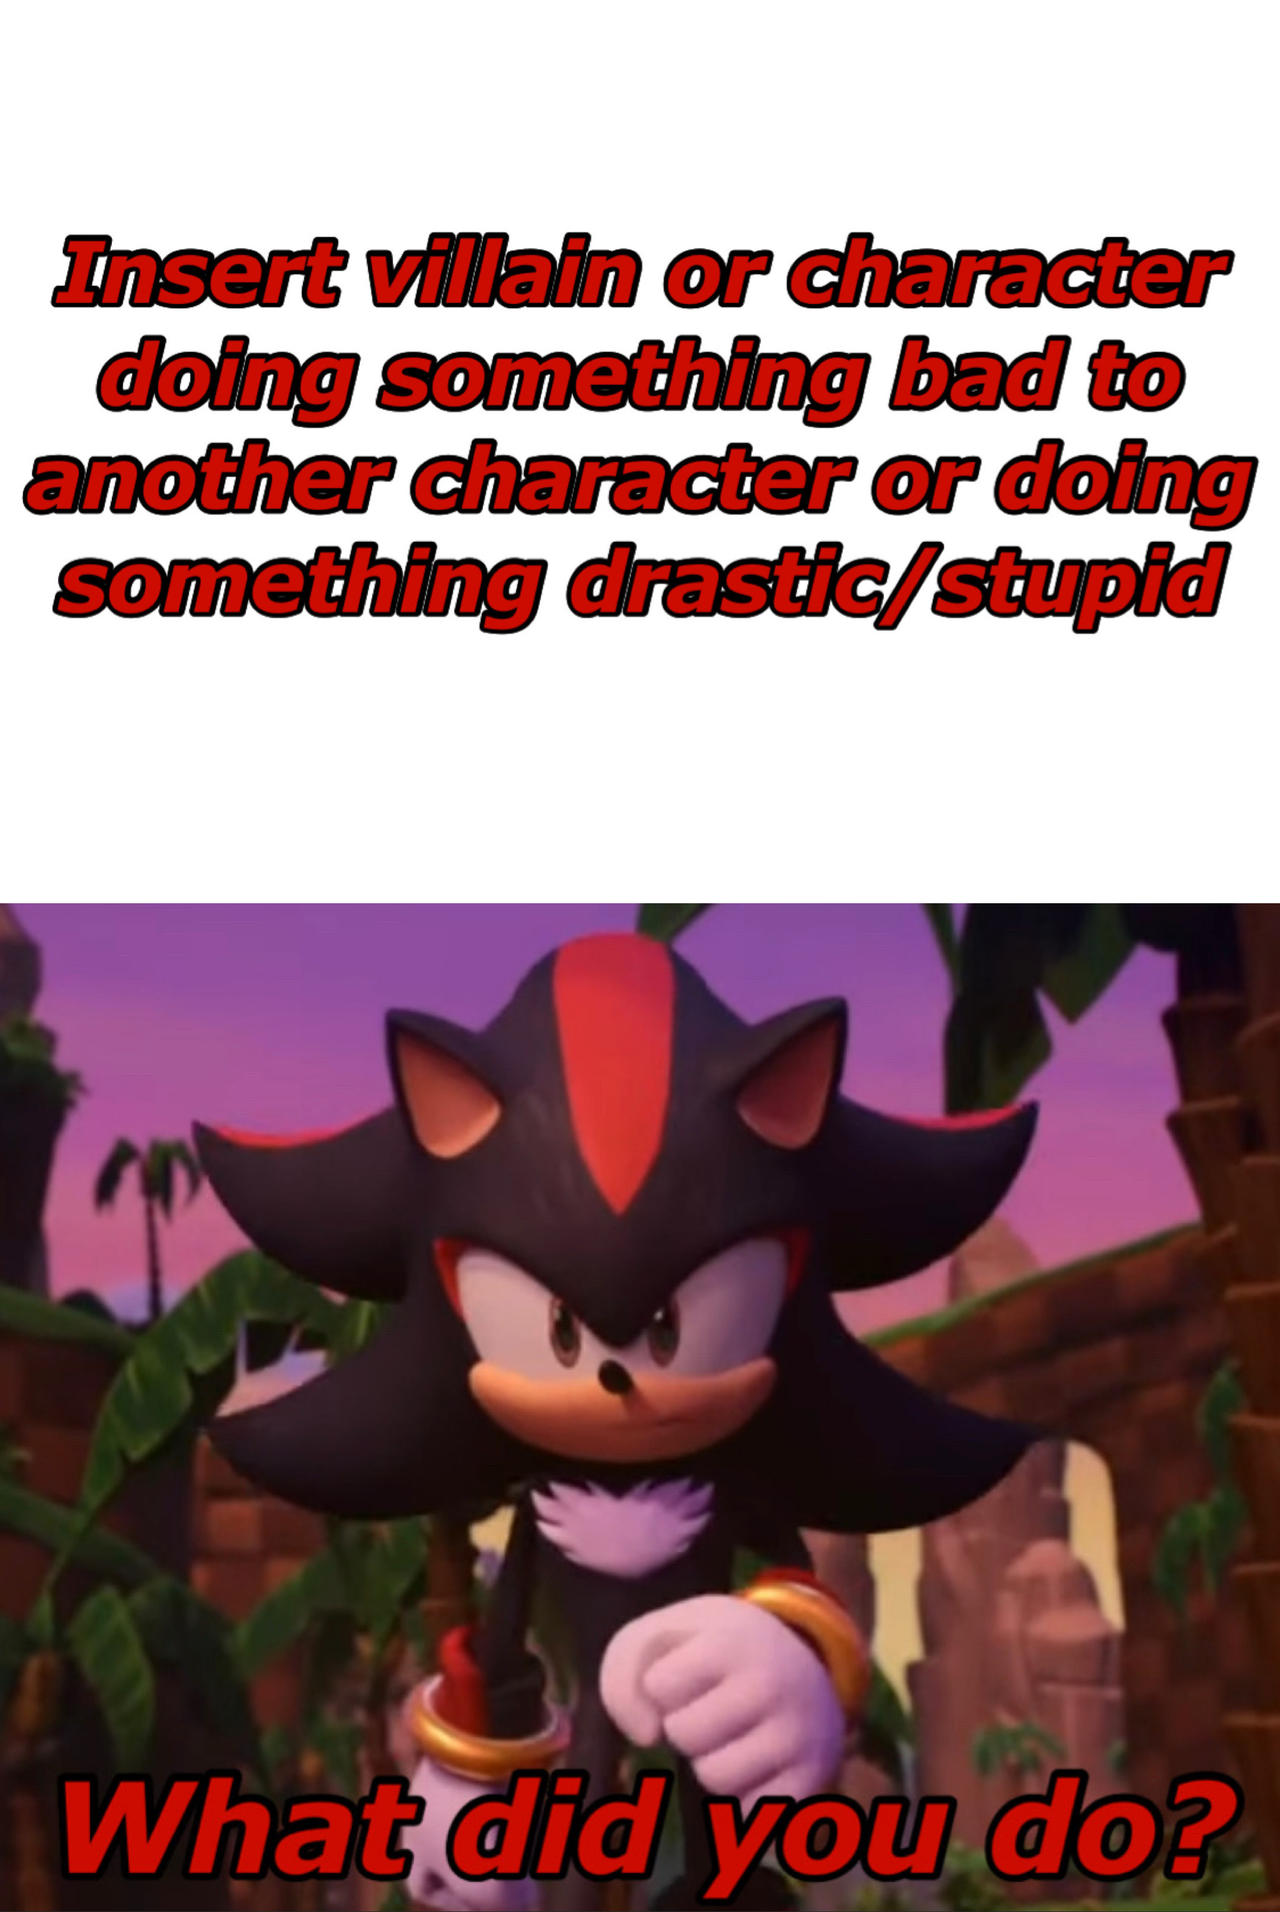 How Shadow the Hedgehog should have ended (MEME)